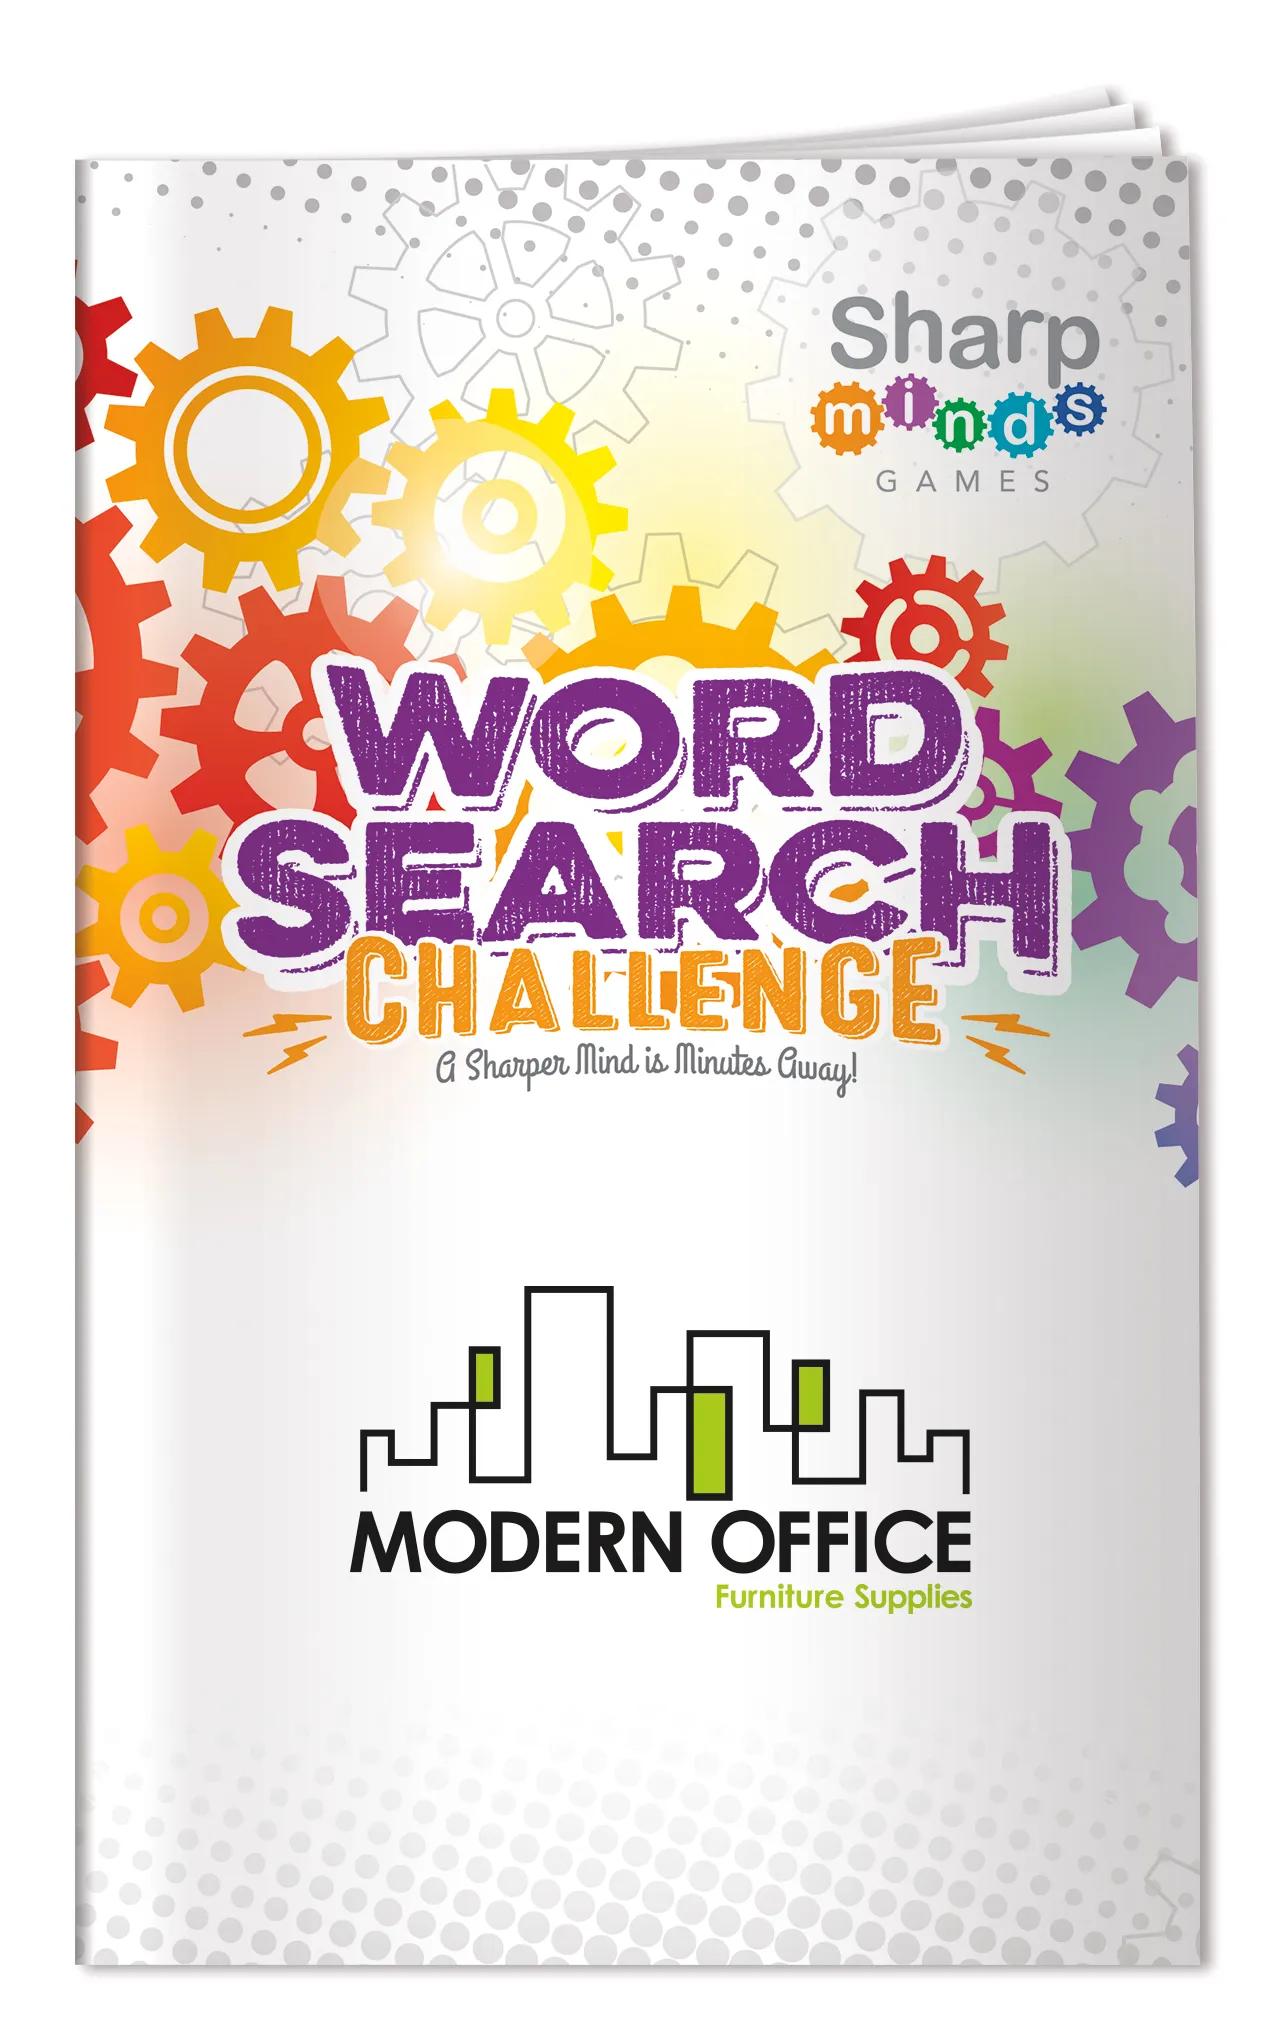 Sharp Minds Games: Word Searches Challenge 6 of 8